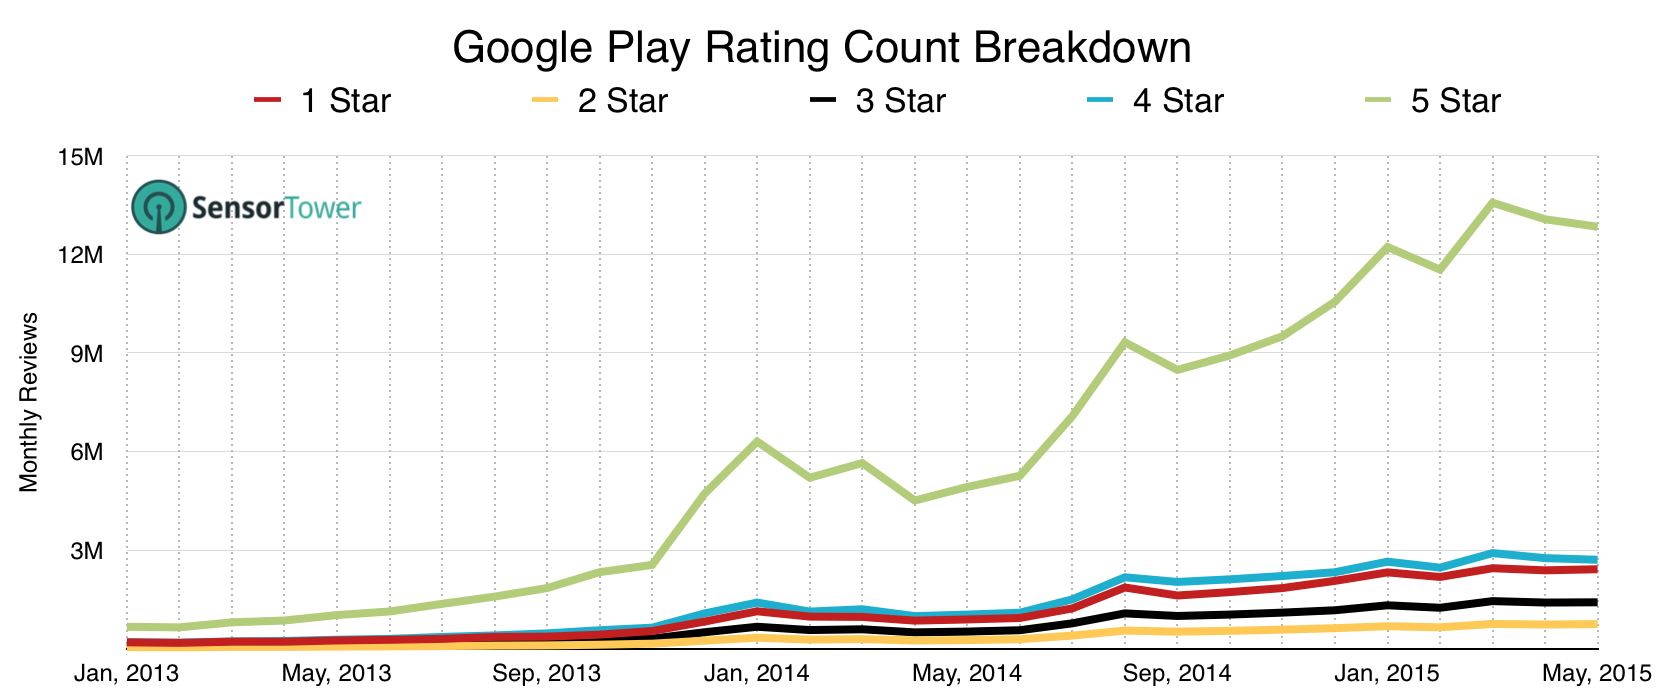 lt="Android Star Count Breakdown